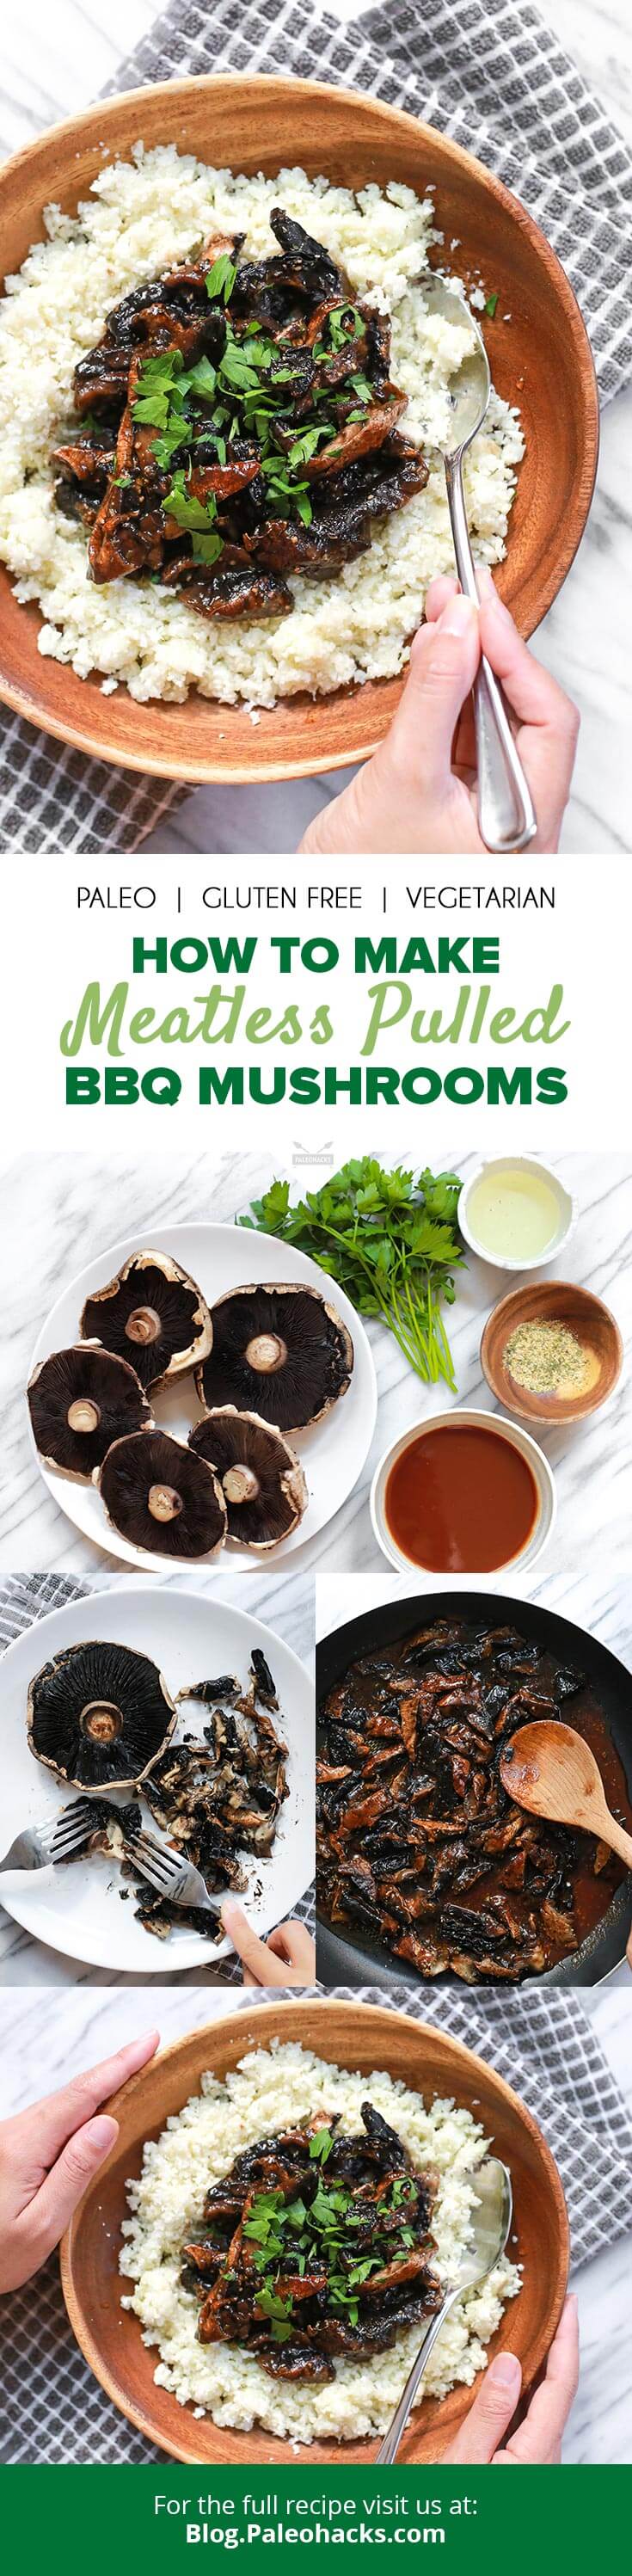 These tender, meatless “pulled pork” style BBQ mushrooms will change everything you thought you knew about barbeque -- for the better!